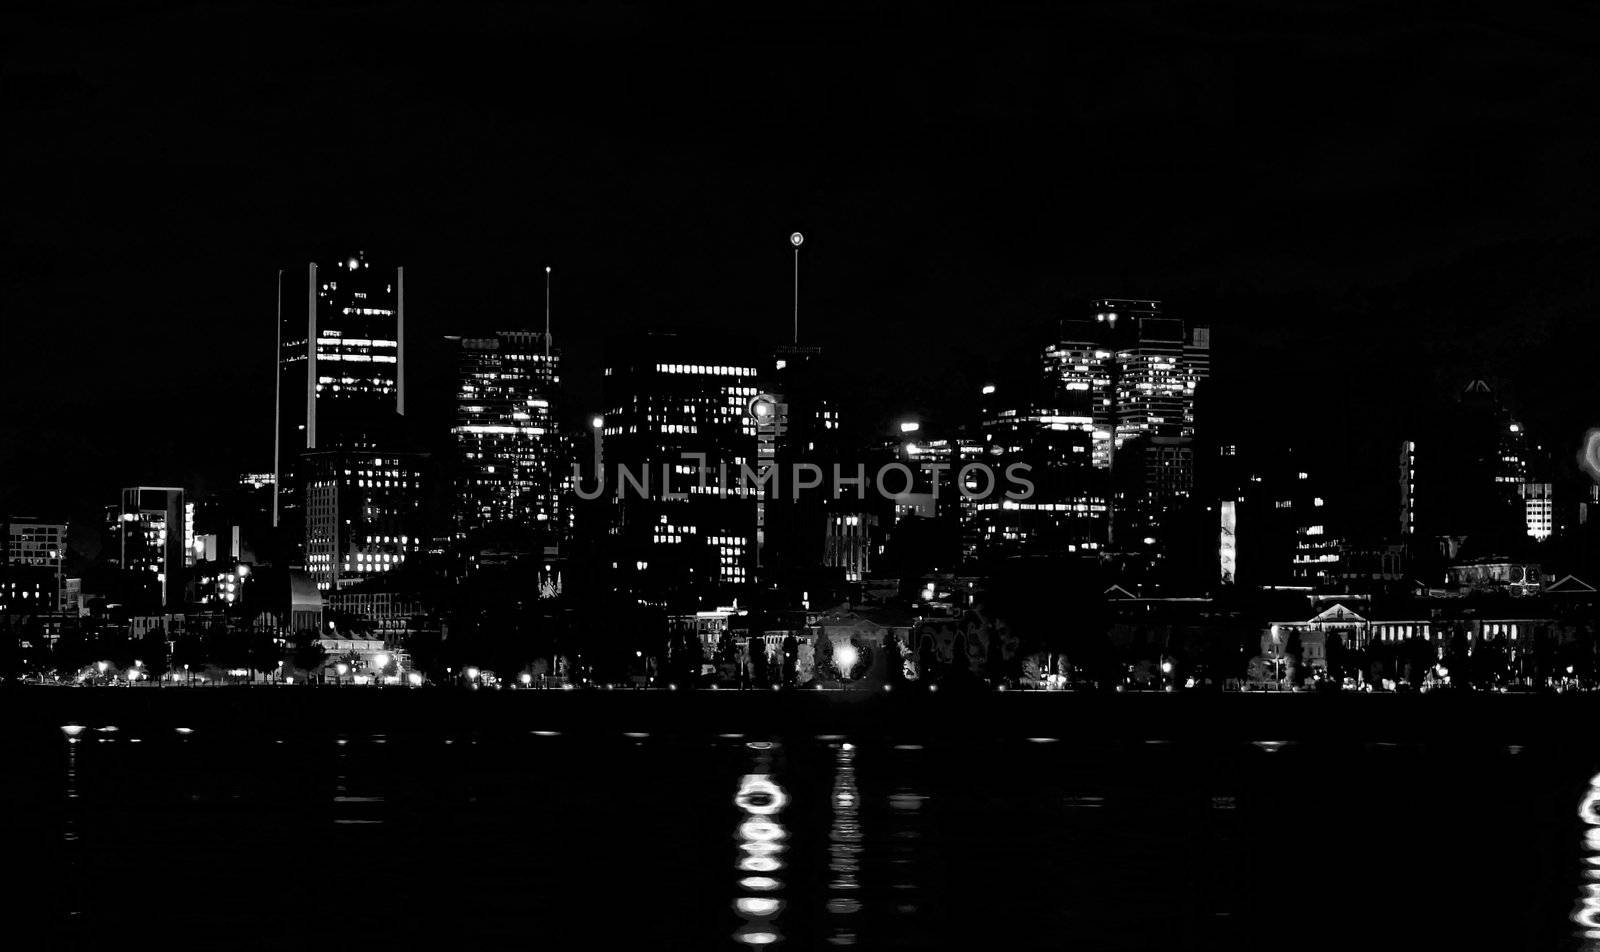 Montreal in silhouette by dbriyul